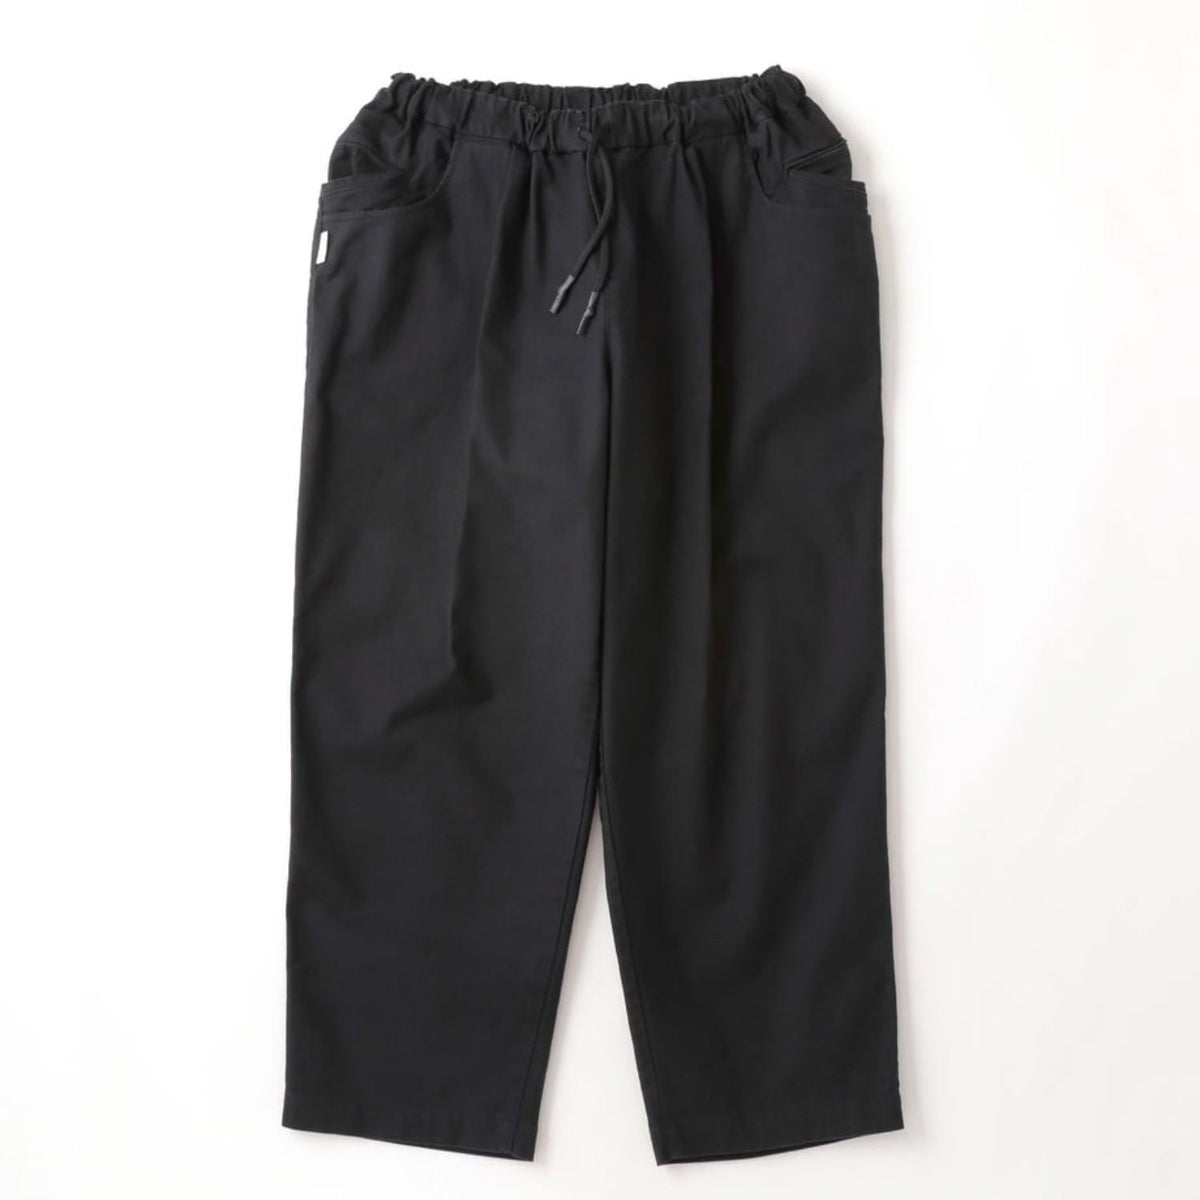 Super Wide Chino Pants - S.F.C (Stripes For Creative) (エス 